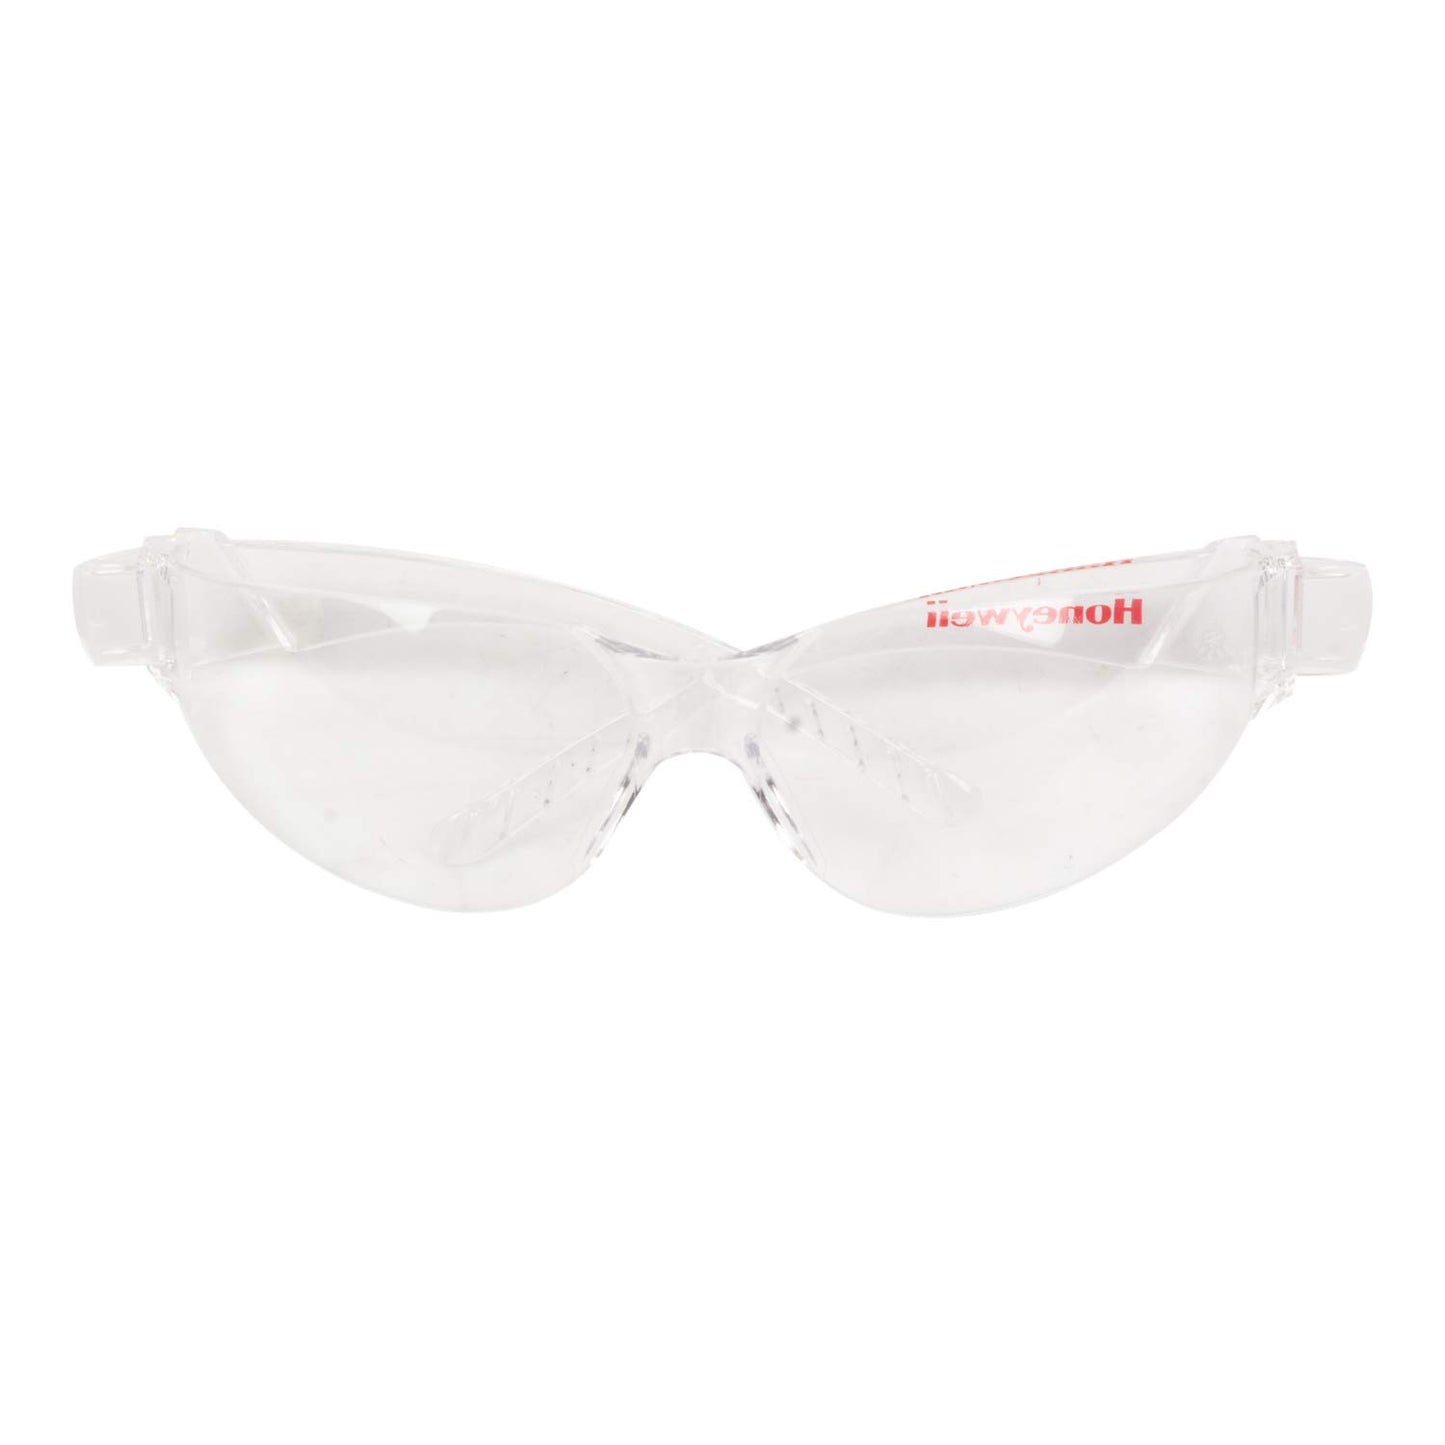 Honeywell S99100 Polycorbonate Clear Lens Anti Fog Safety Glases